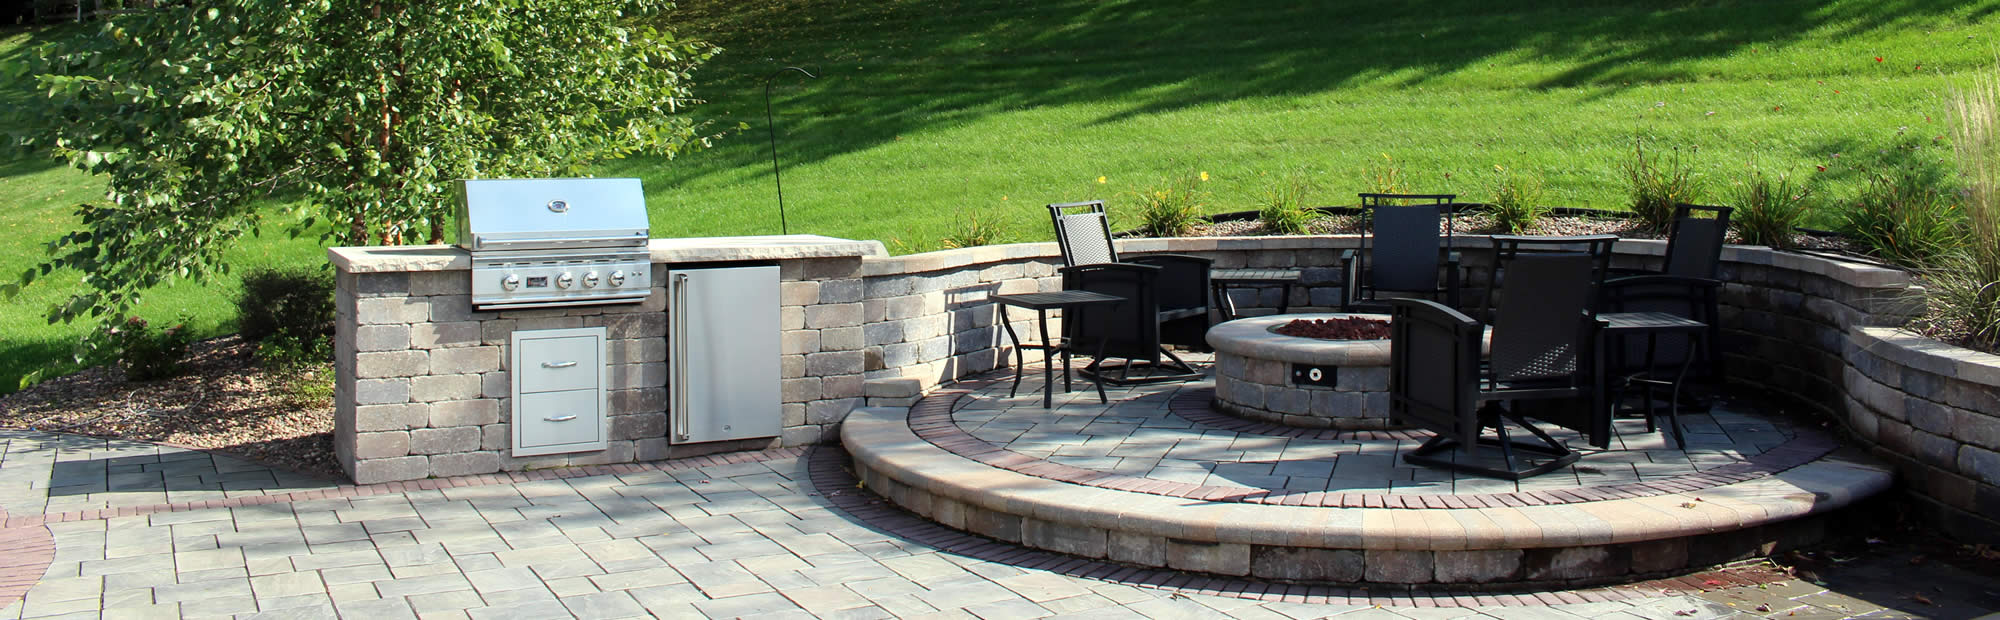 Outdoor Kitchen with Patio and Retaining Wall Construction